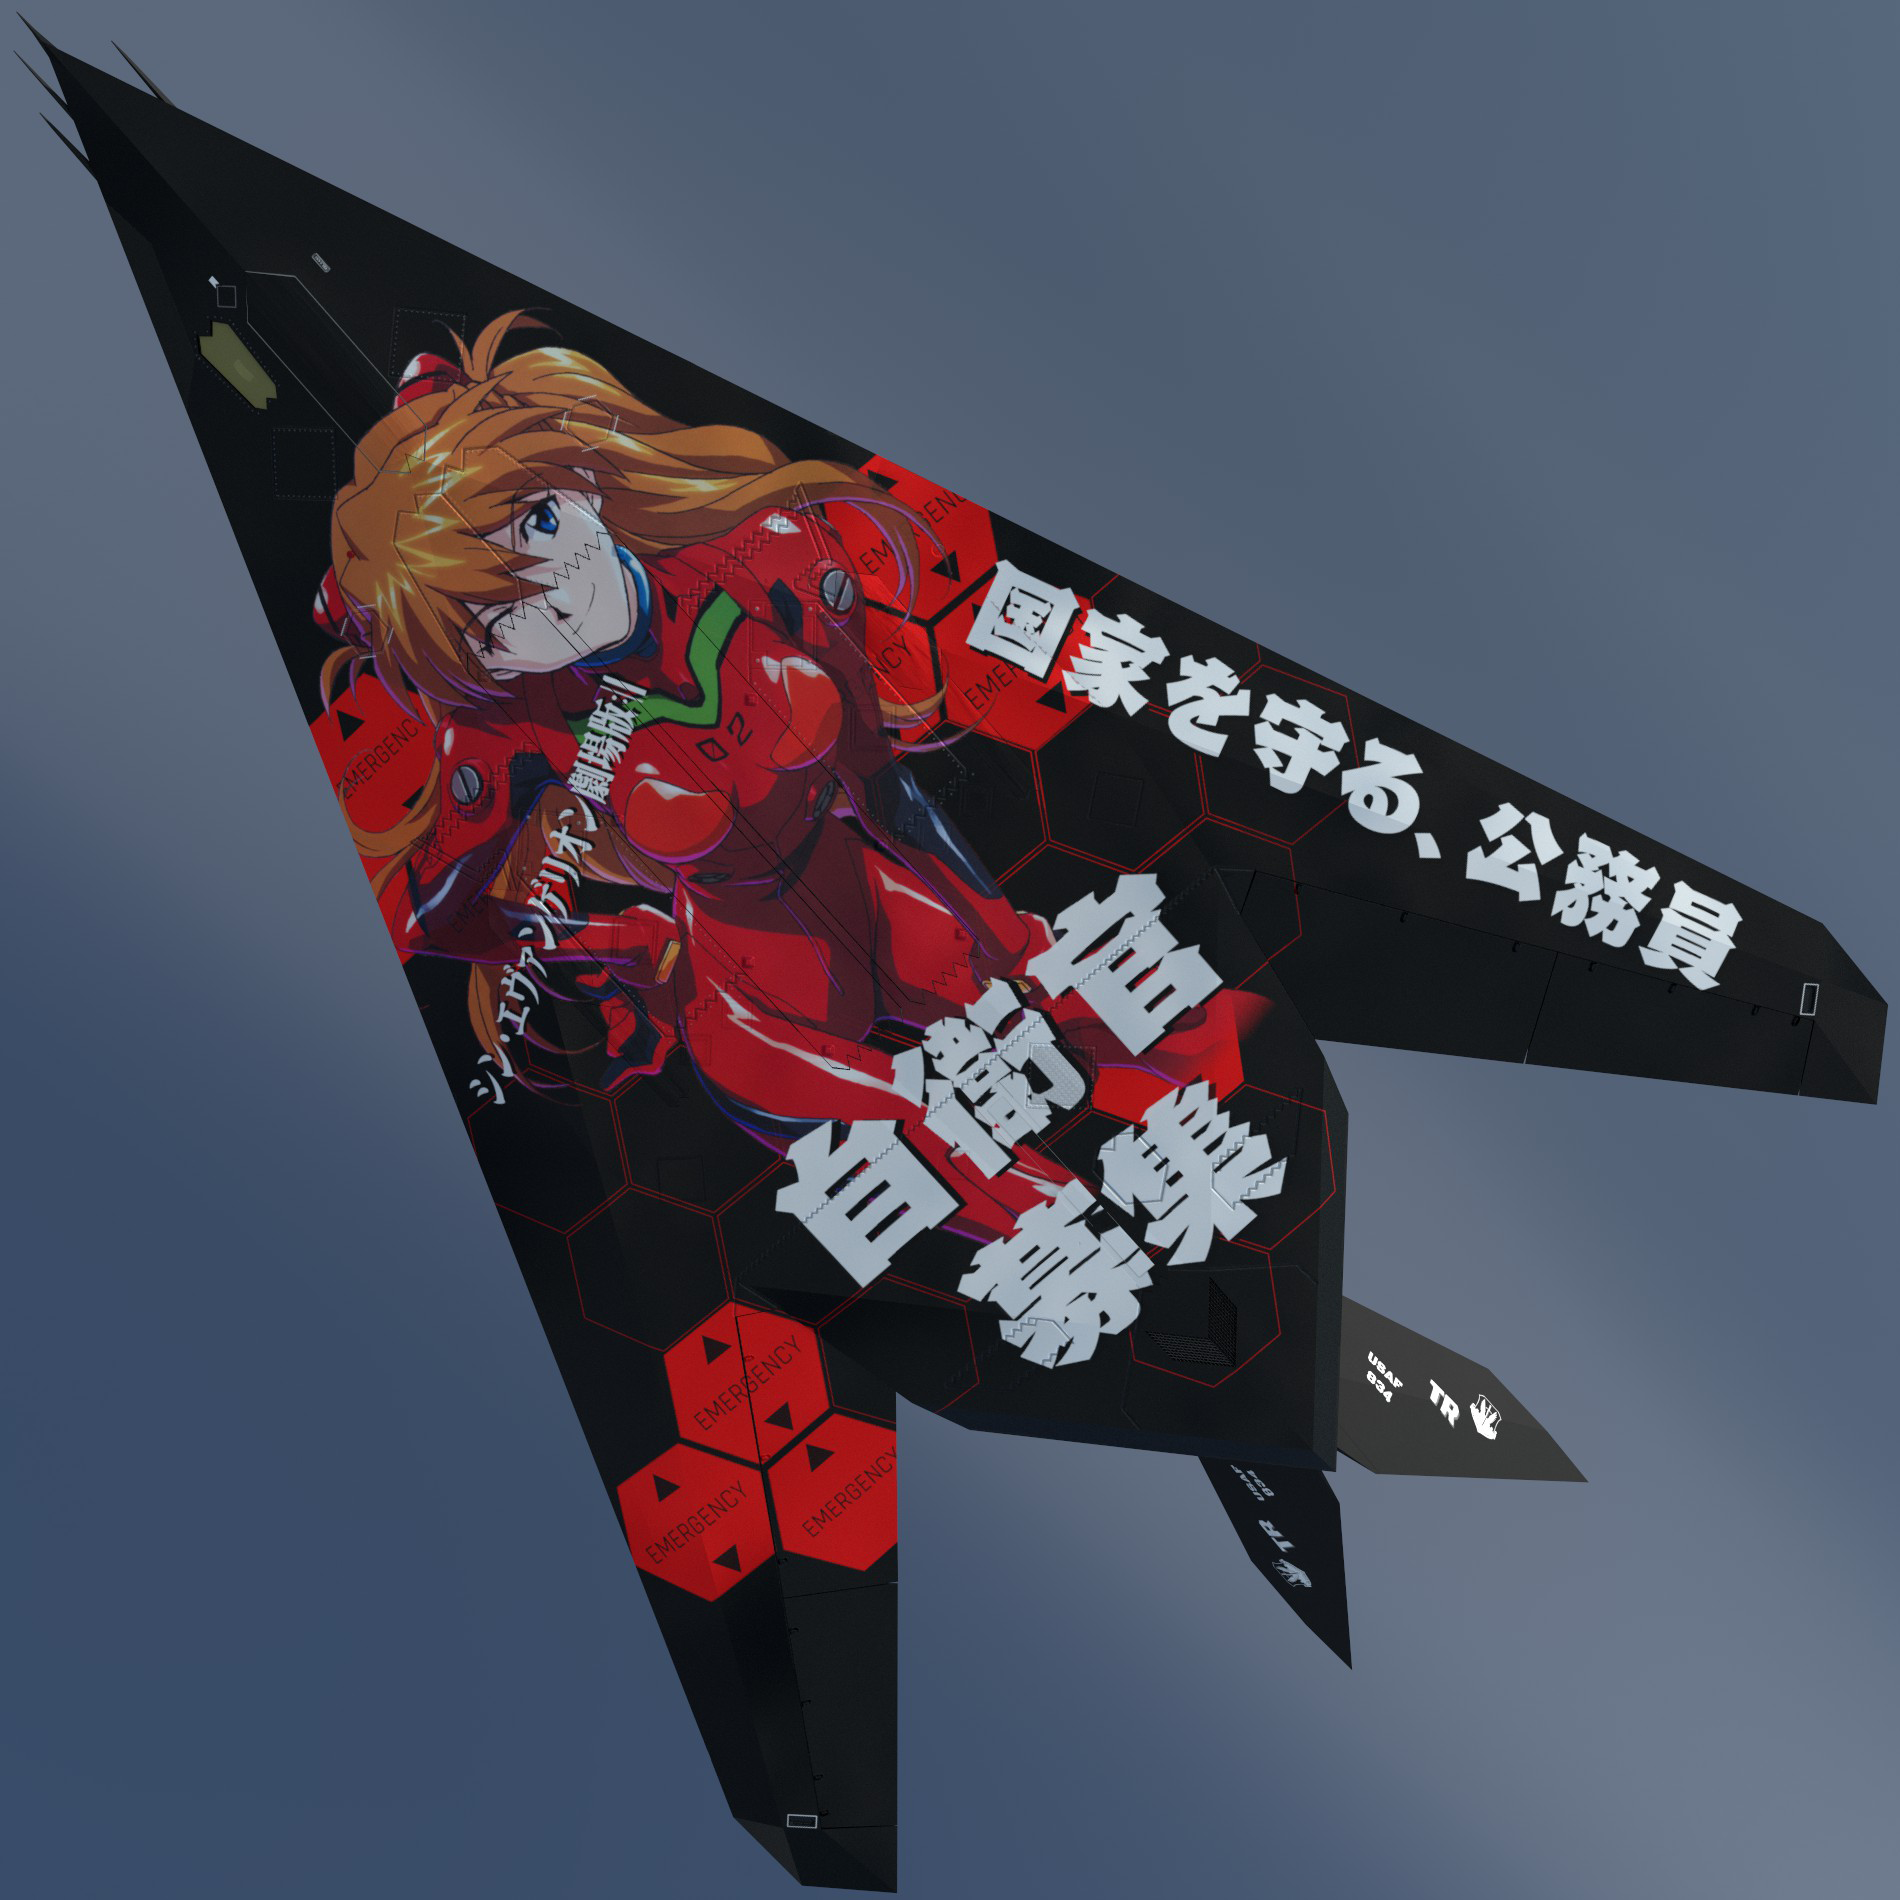 Evangelion Asuka F117A Preview Image